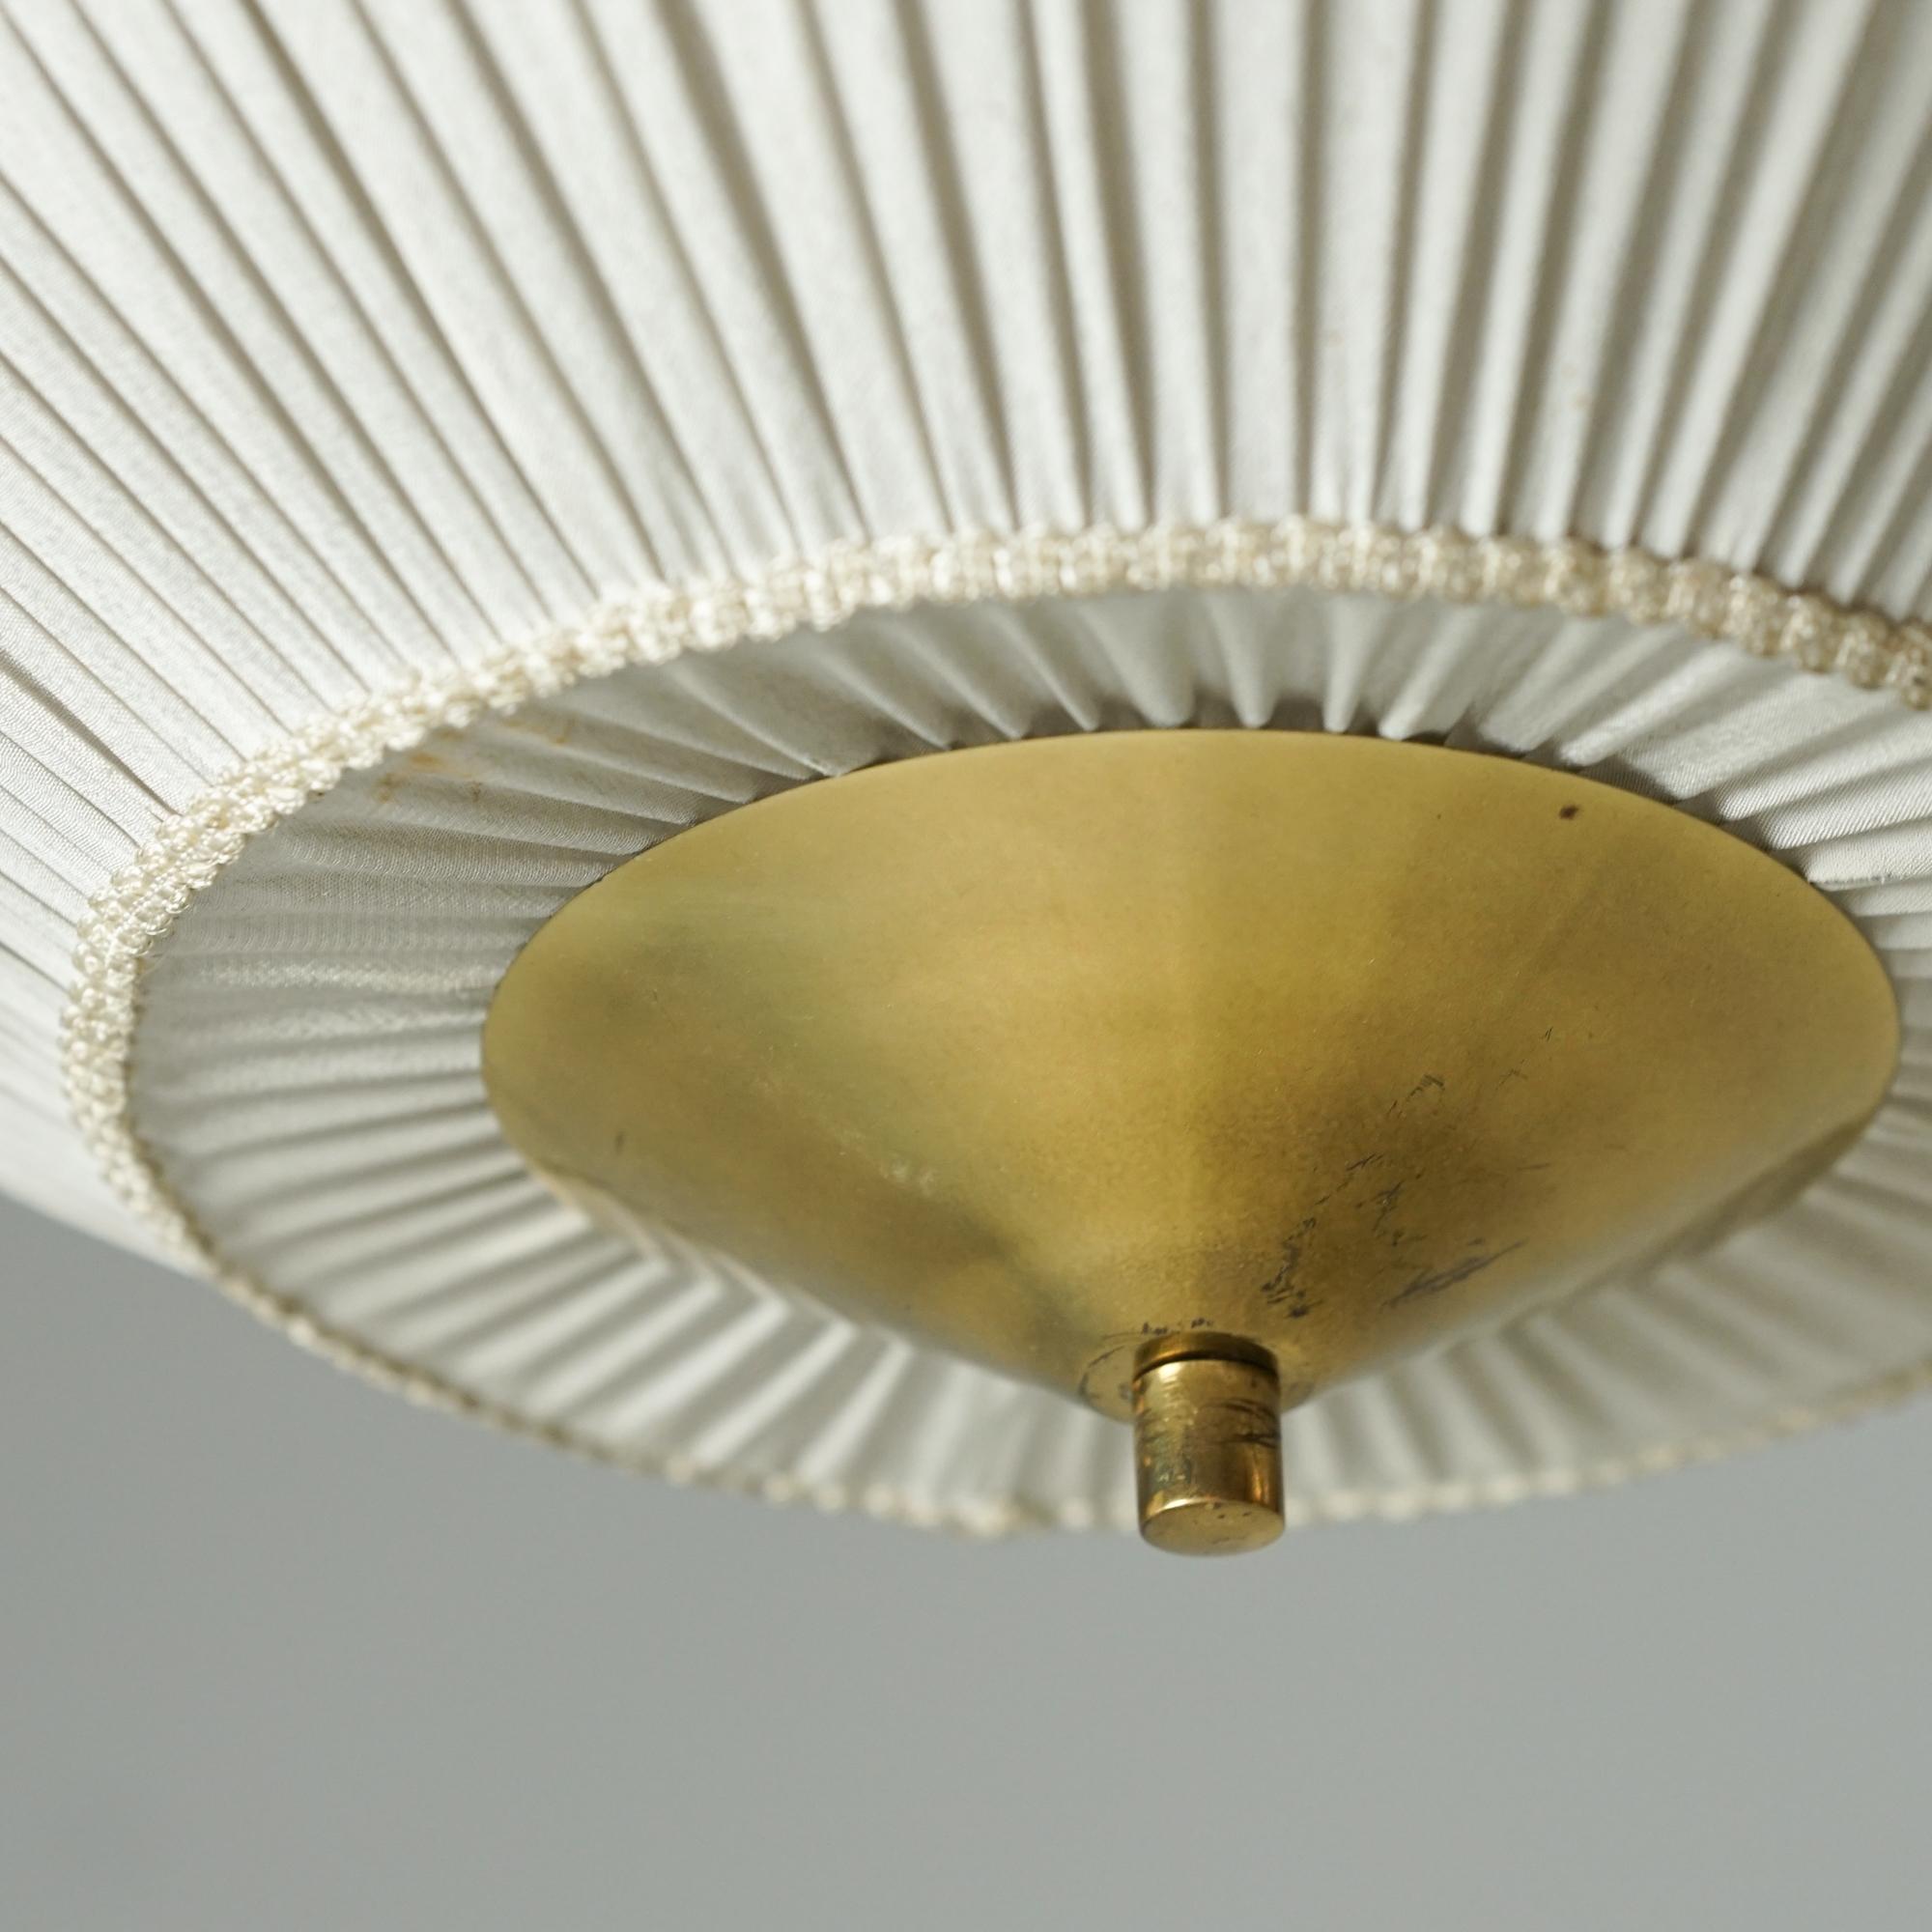 Flush mount, manufactured by Valinte Oy Finland from the 1950s. Brass with silk shade. Good vintage condition, minor patina consistent with age and use. Beautiful timeless Scandinavian Modern design. 